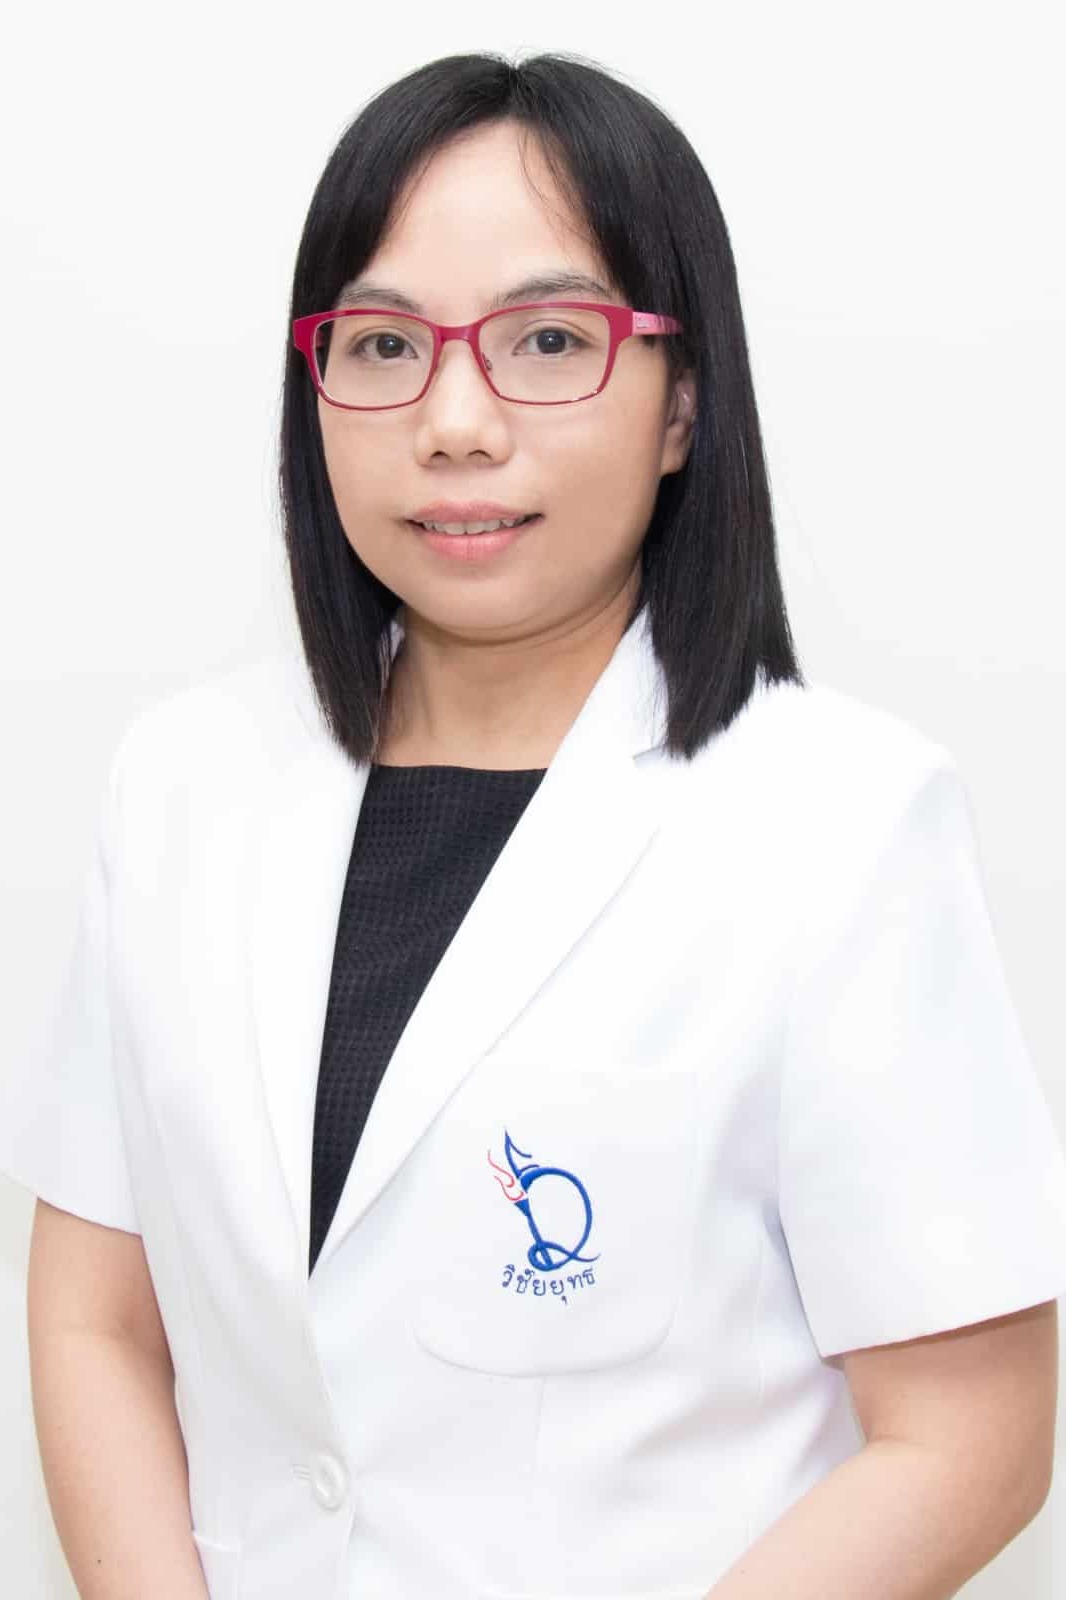 Dr. Pattraporn Chaowanapanja, Radiology Specialist in Thailand ...